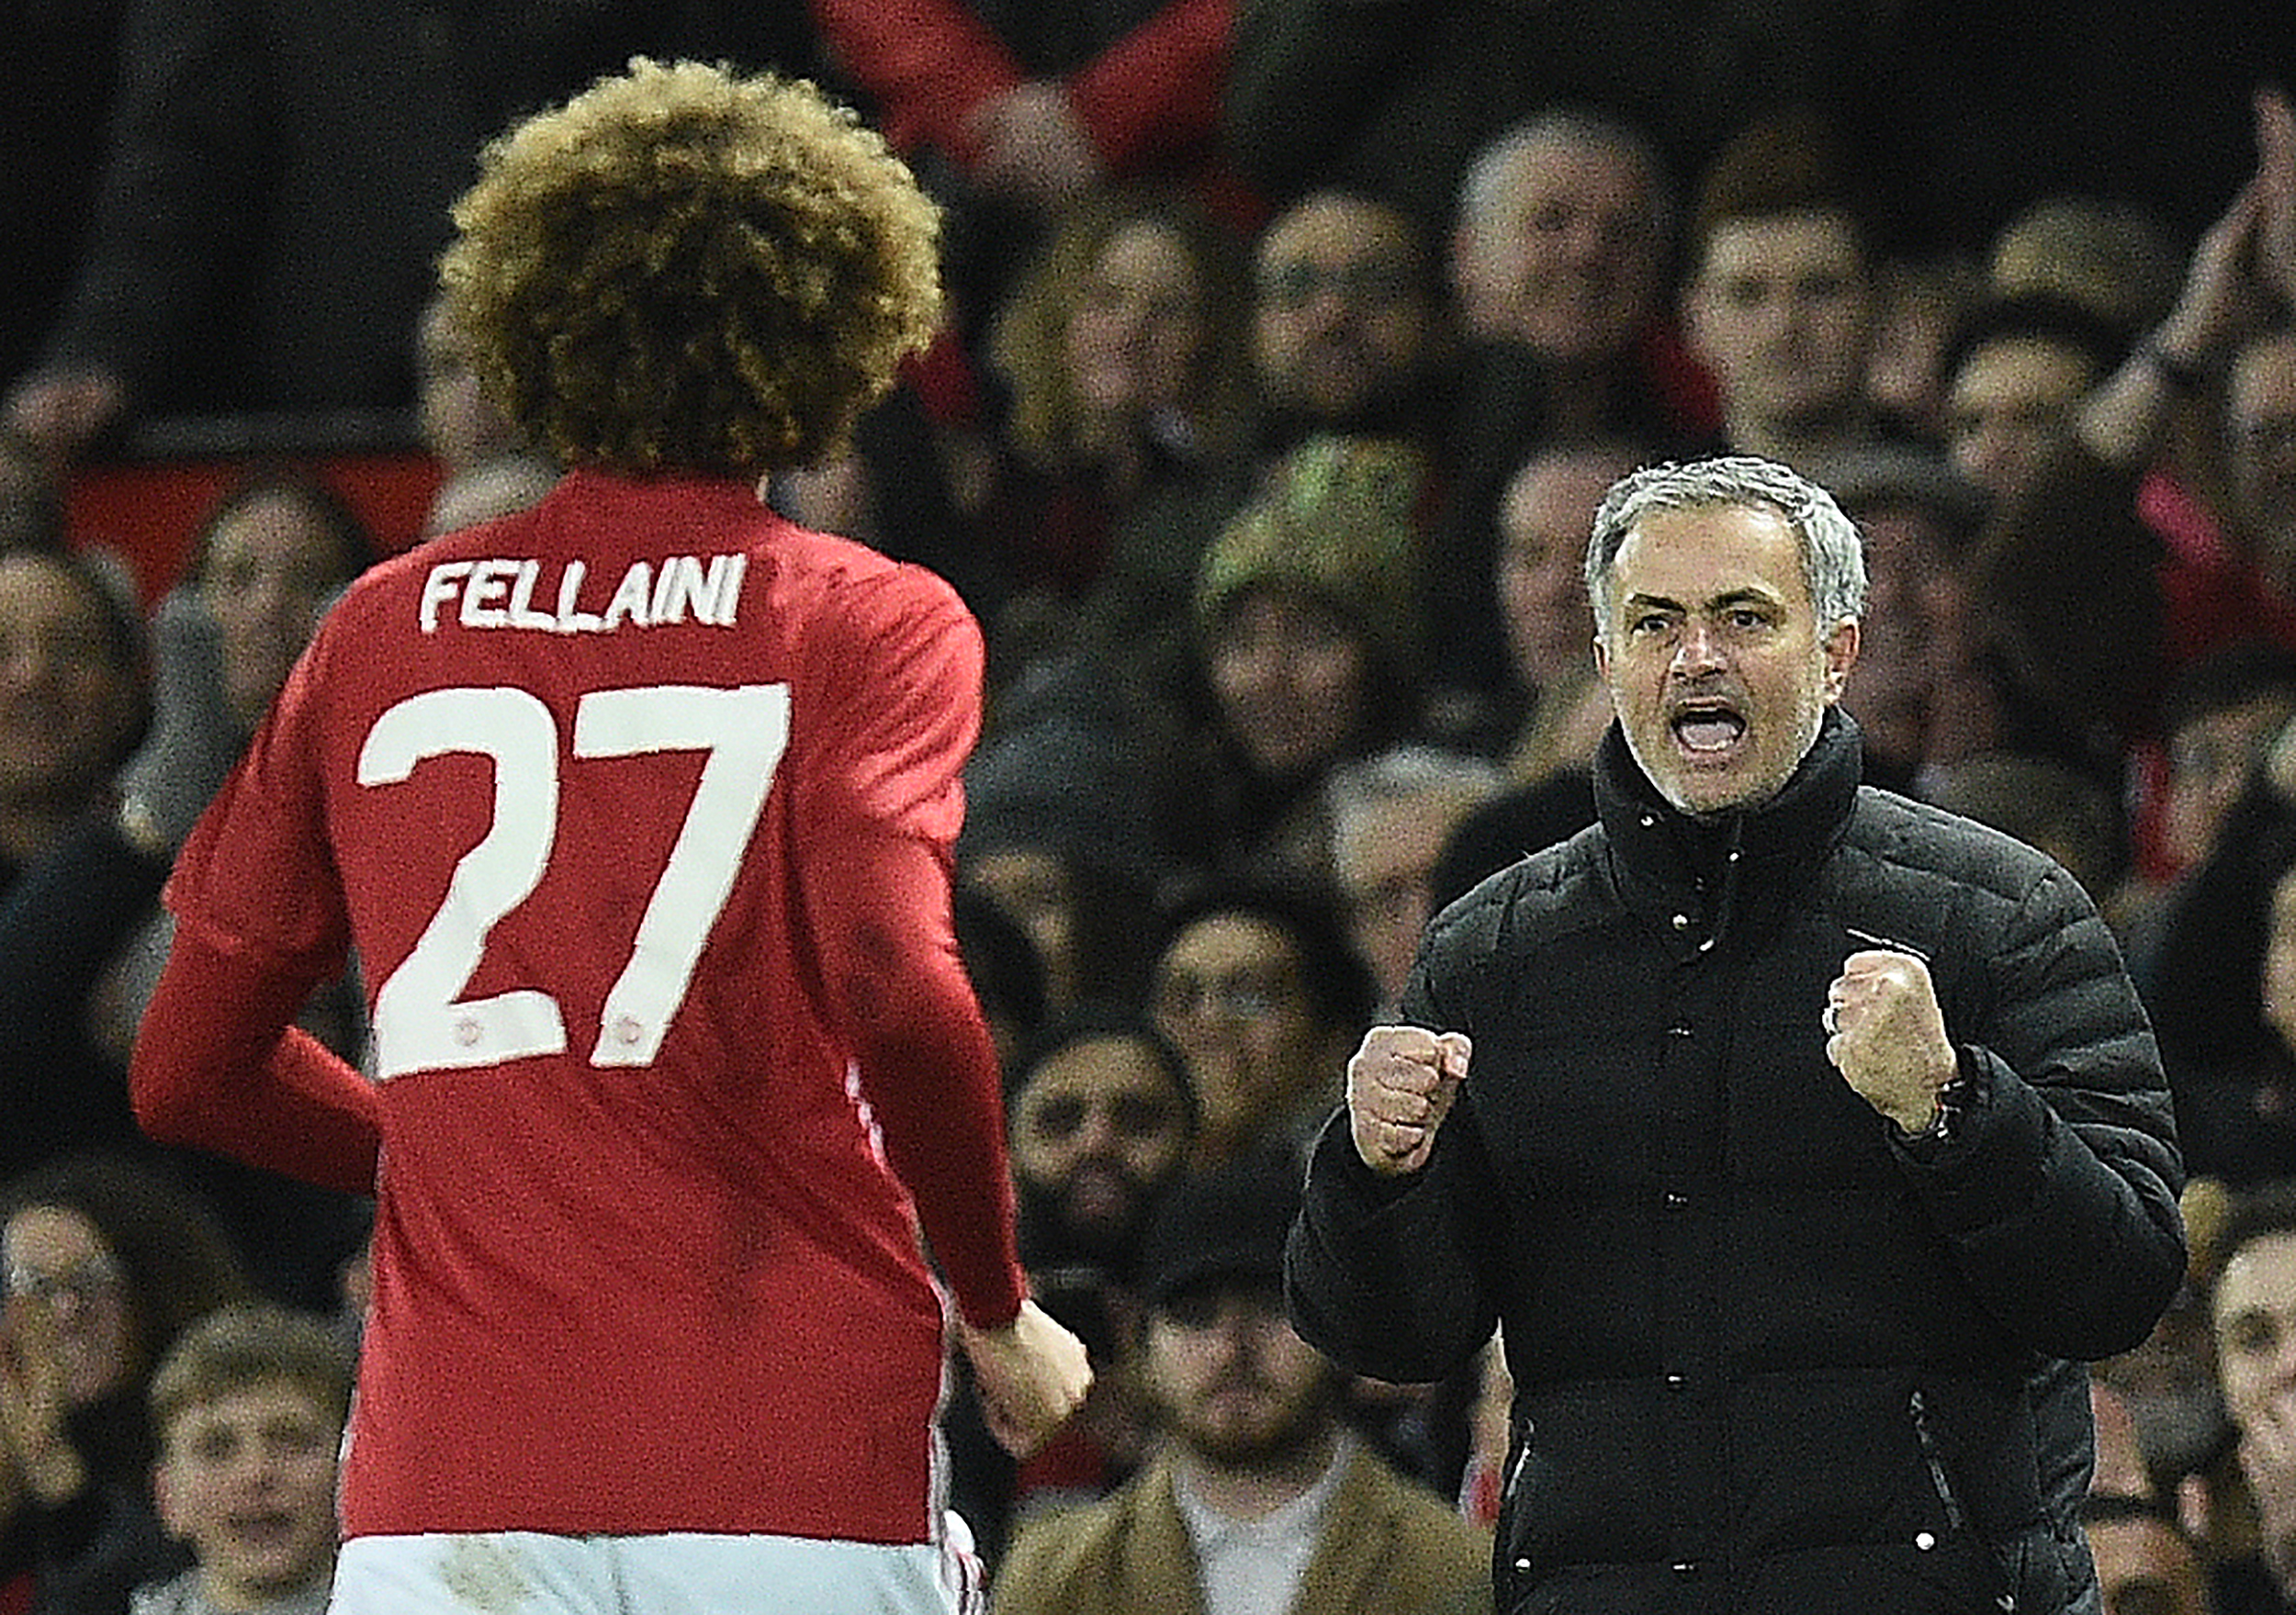 Manchester United's Belgian midfielder Marouane Fellaini (L) celebrates scoring his team's second goal with Manchester United's Portuguese manager Jose Mourinho during the EFL (English Football League) Cup semi-final football match between Manchester United and Hull City at Old Trafford in Manchester, north west England on January 10, 2017. / AFP / Oli SCARFF / RESTRICTED TO EDITORIAL USE. No use with unauthorized audio, video, data, fixture lists, club/league logos or 'live' services. Online in-match use limited to 75 images, no video emulation. No use in betting, games or single club/league/player publications.  /         (Photo credit should read OLI SCARFF/AFP/Getty Images)